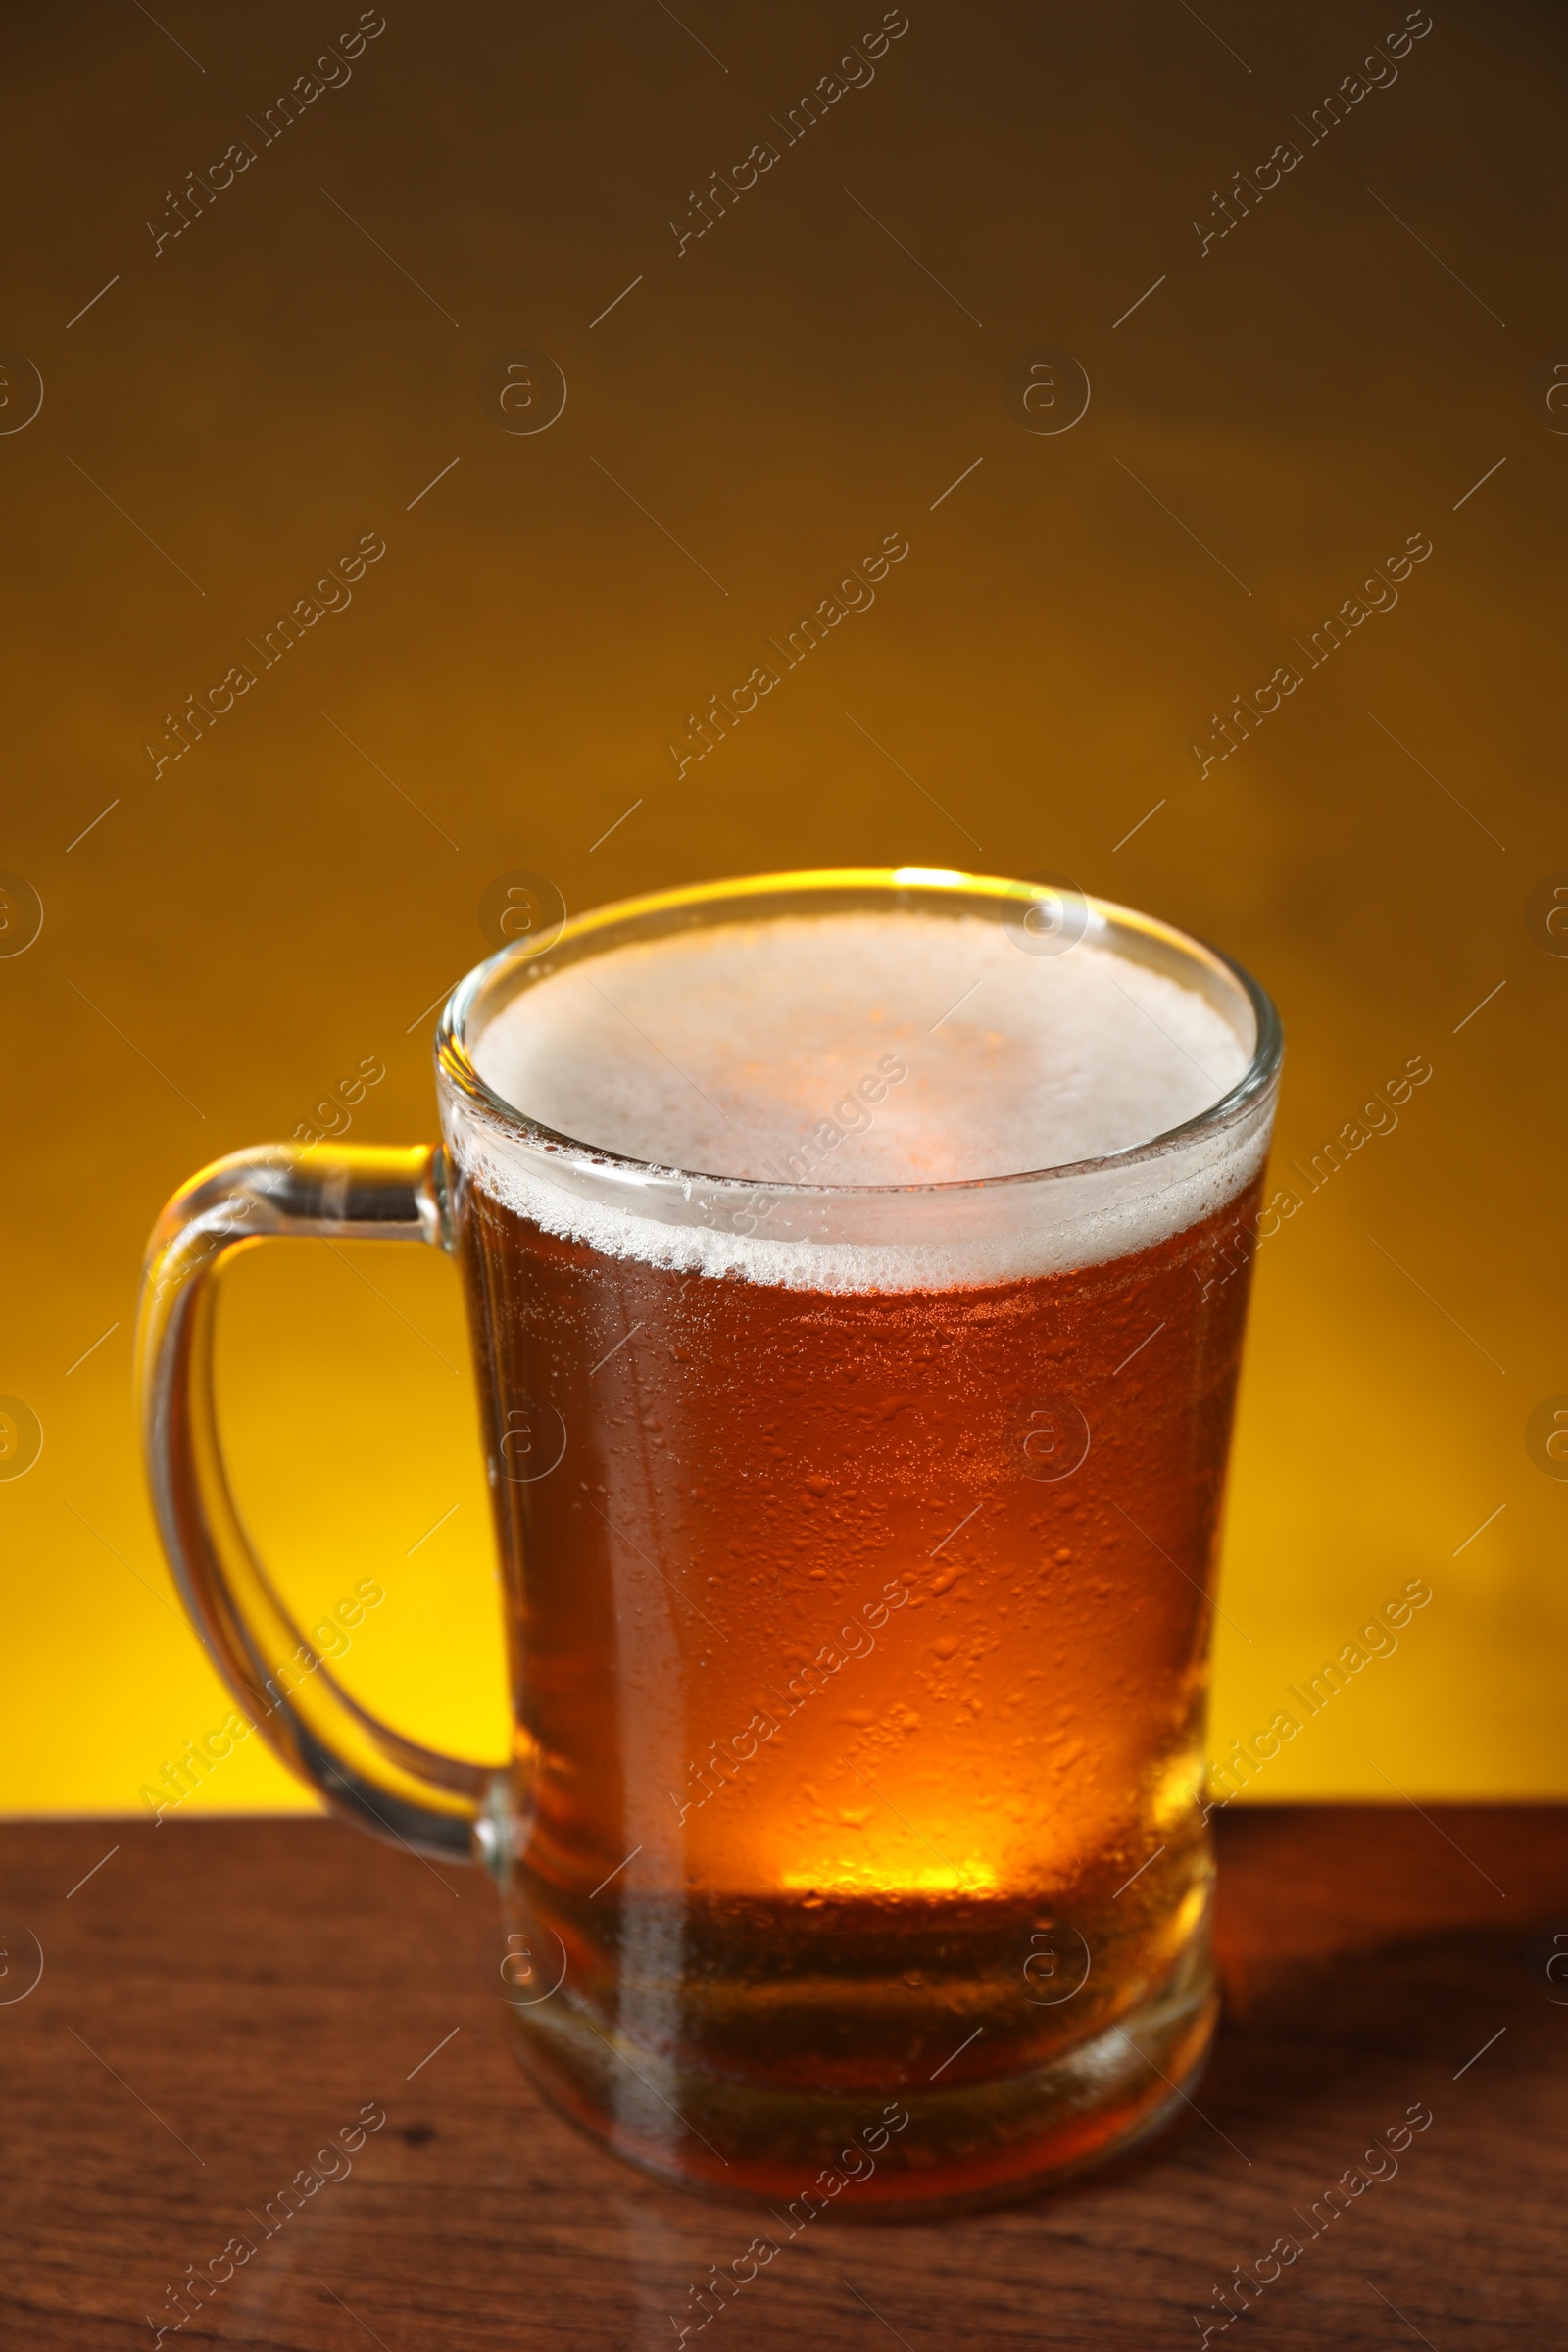 Photo of Mug with fresh beer on wooden table against dark background